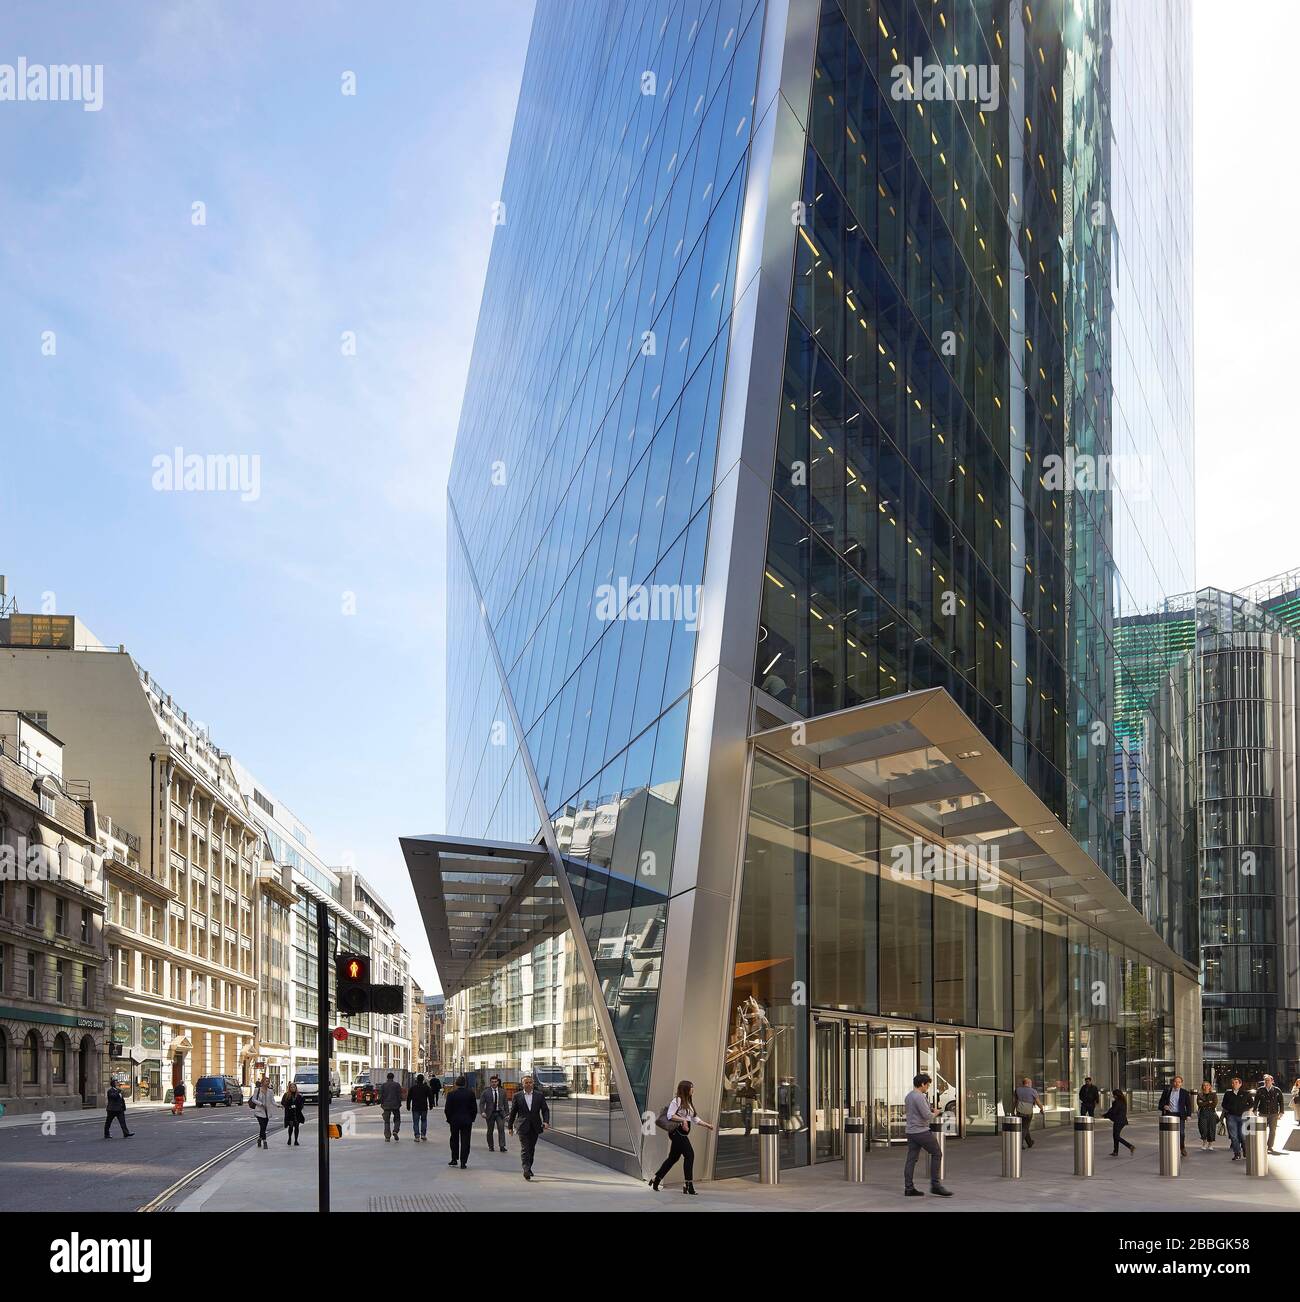 Corner view of reflective facade at Lime and Leadenhall Streets. 52 Lime Street - The Scalpel, London, United Kingdom. Architect: Kohn Pedersen Fox As Stock Photo